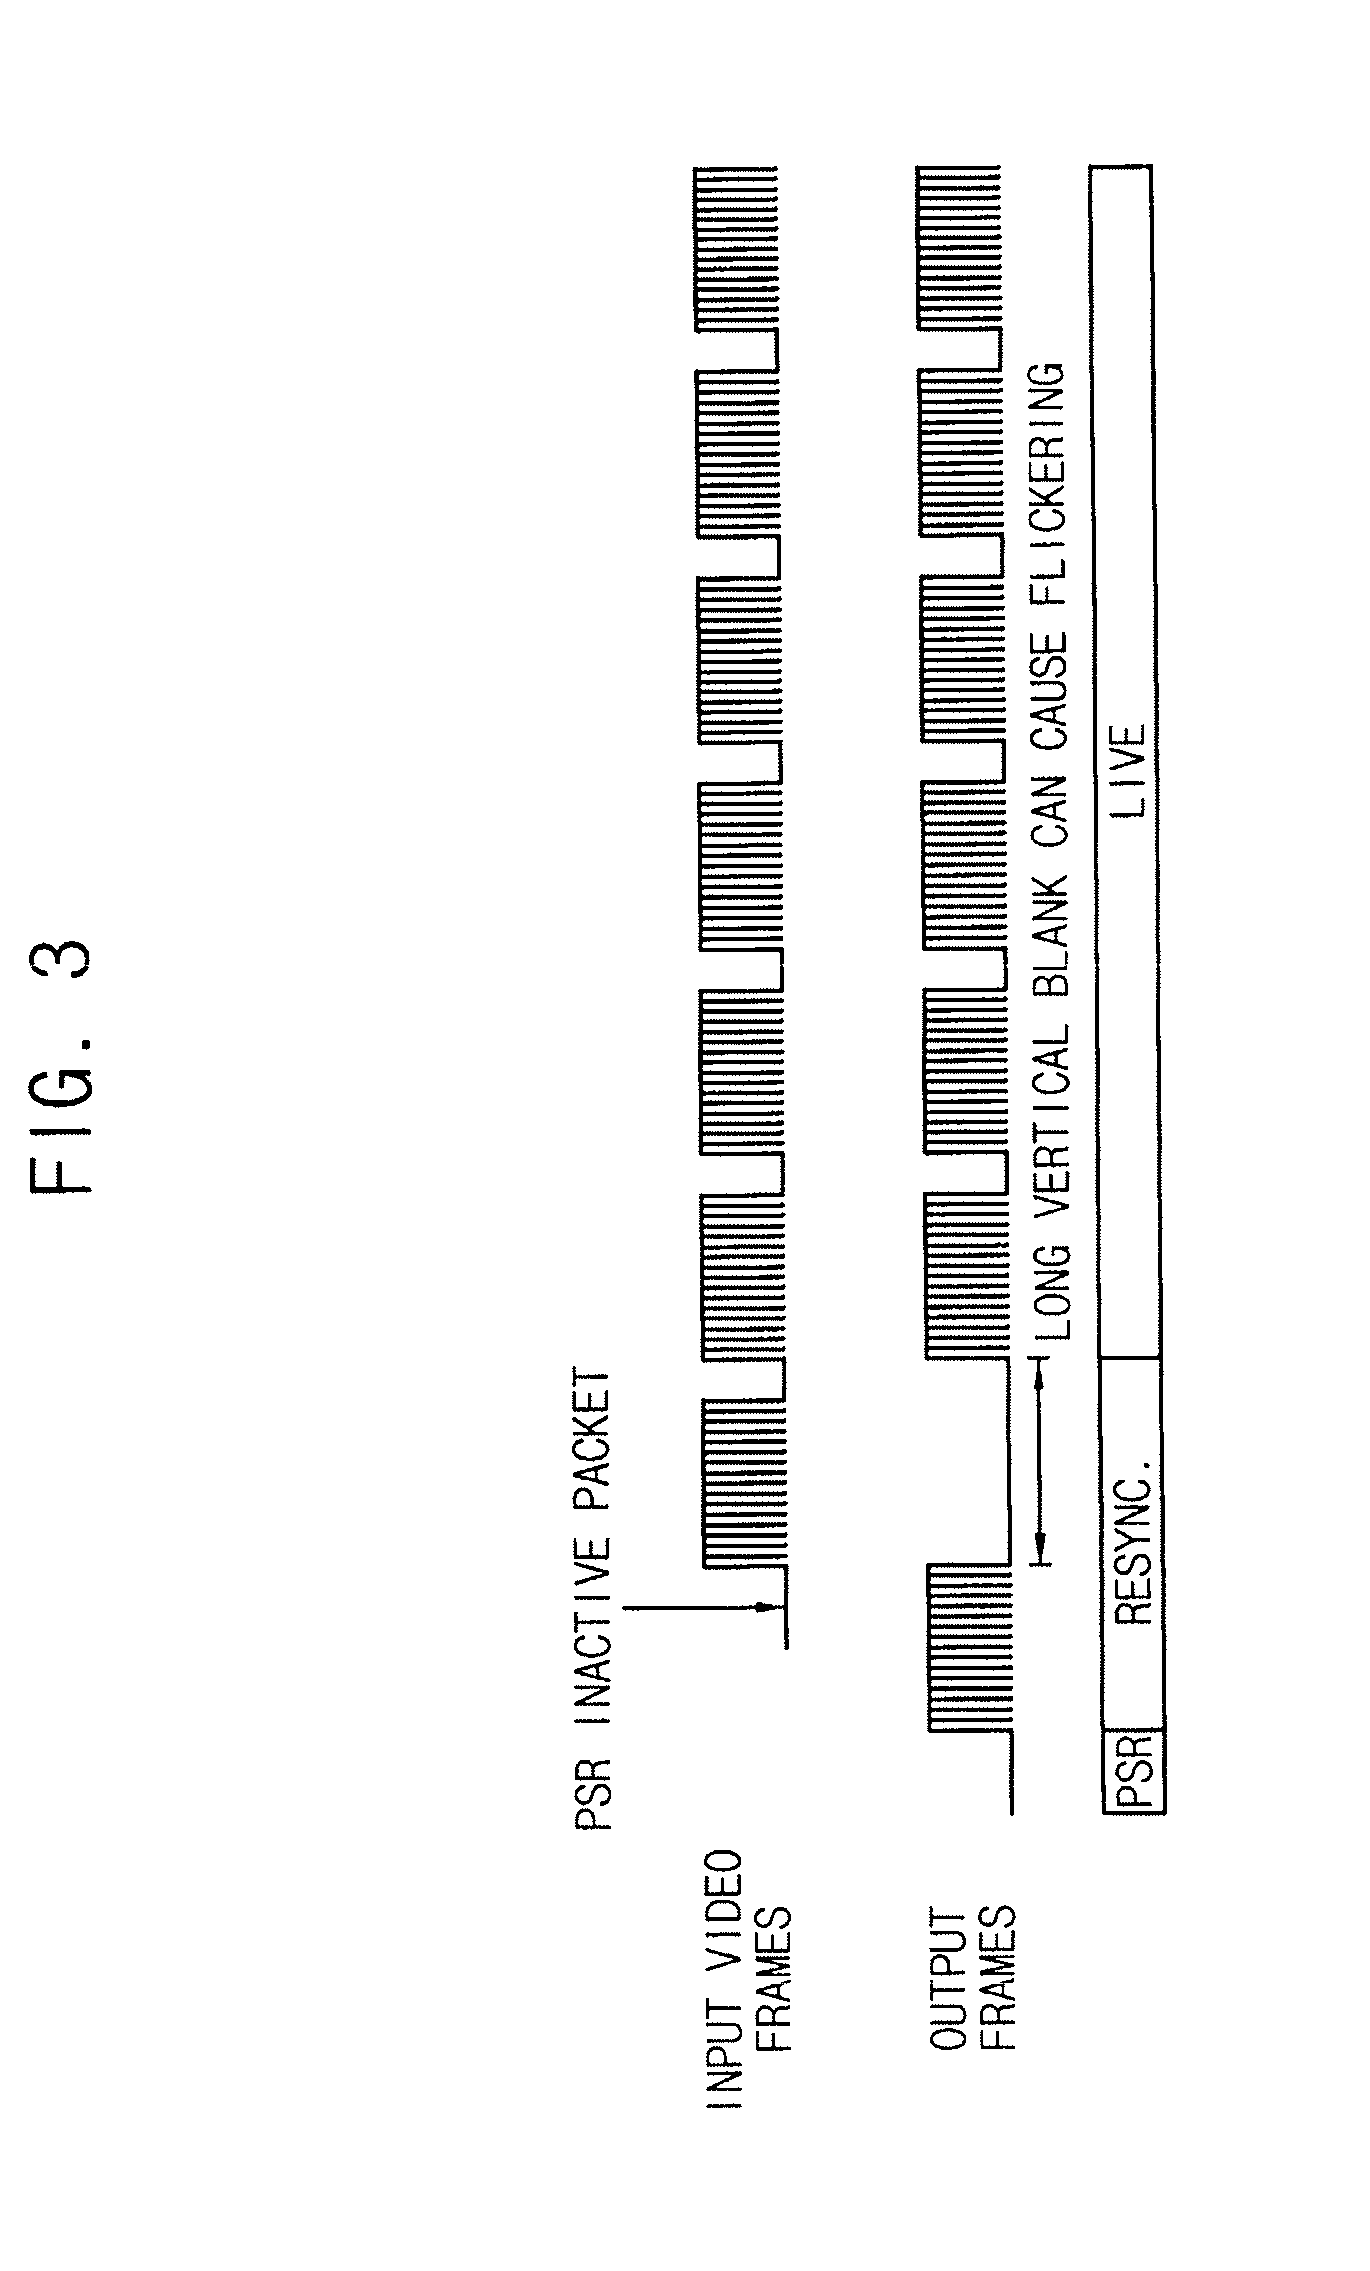 Display drive integrated circuit and image display system